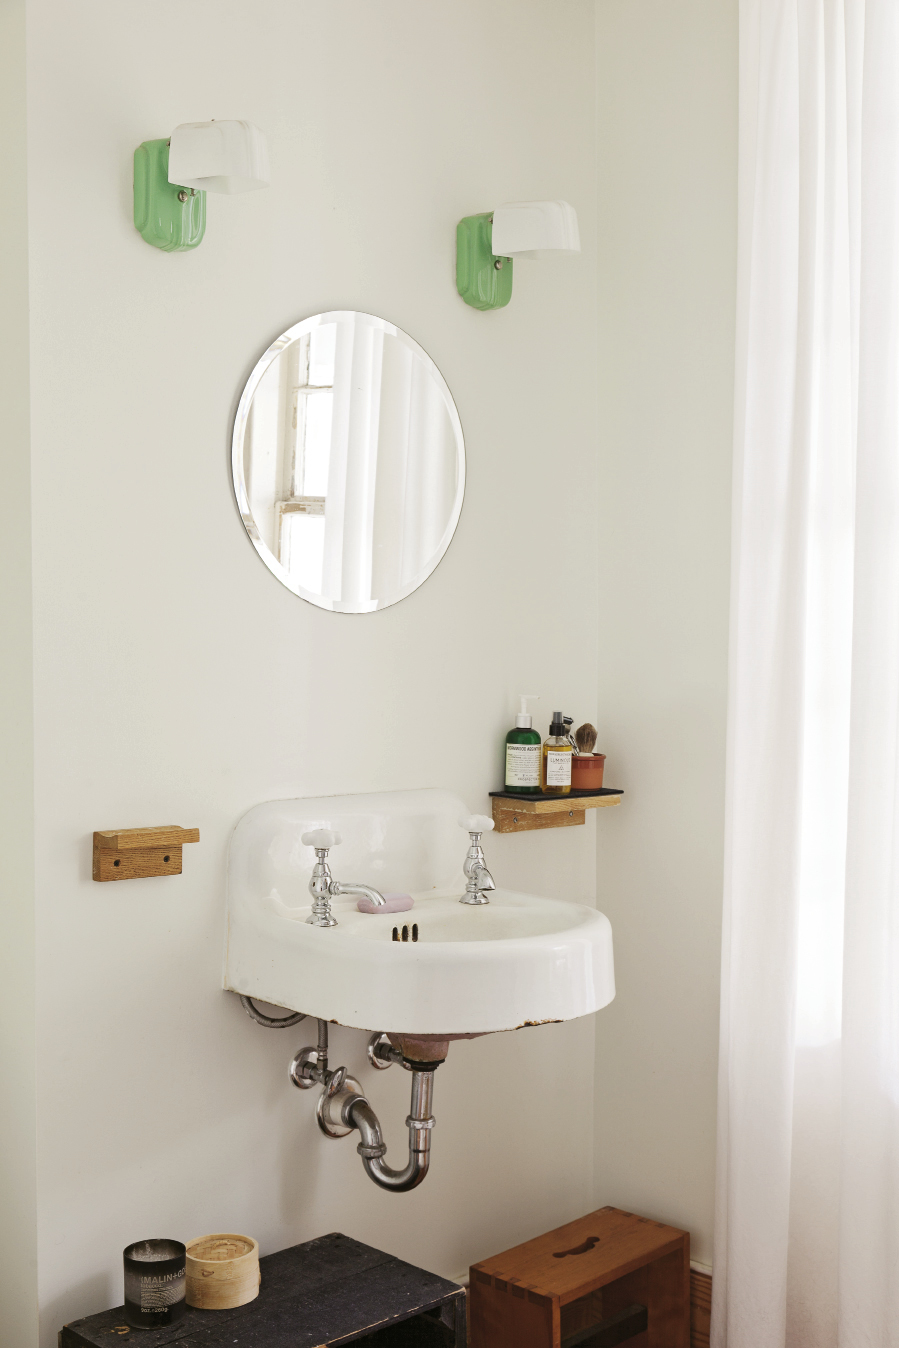 In the bath, retro-inspired sconces suit the original sink.